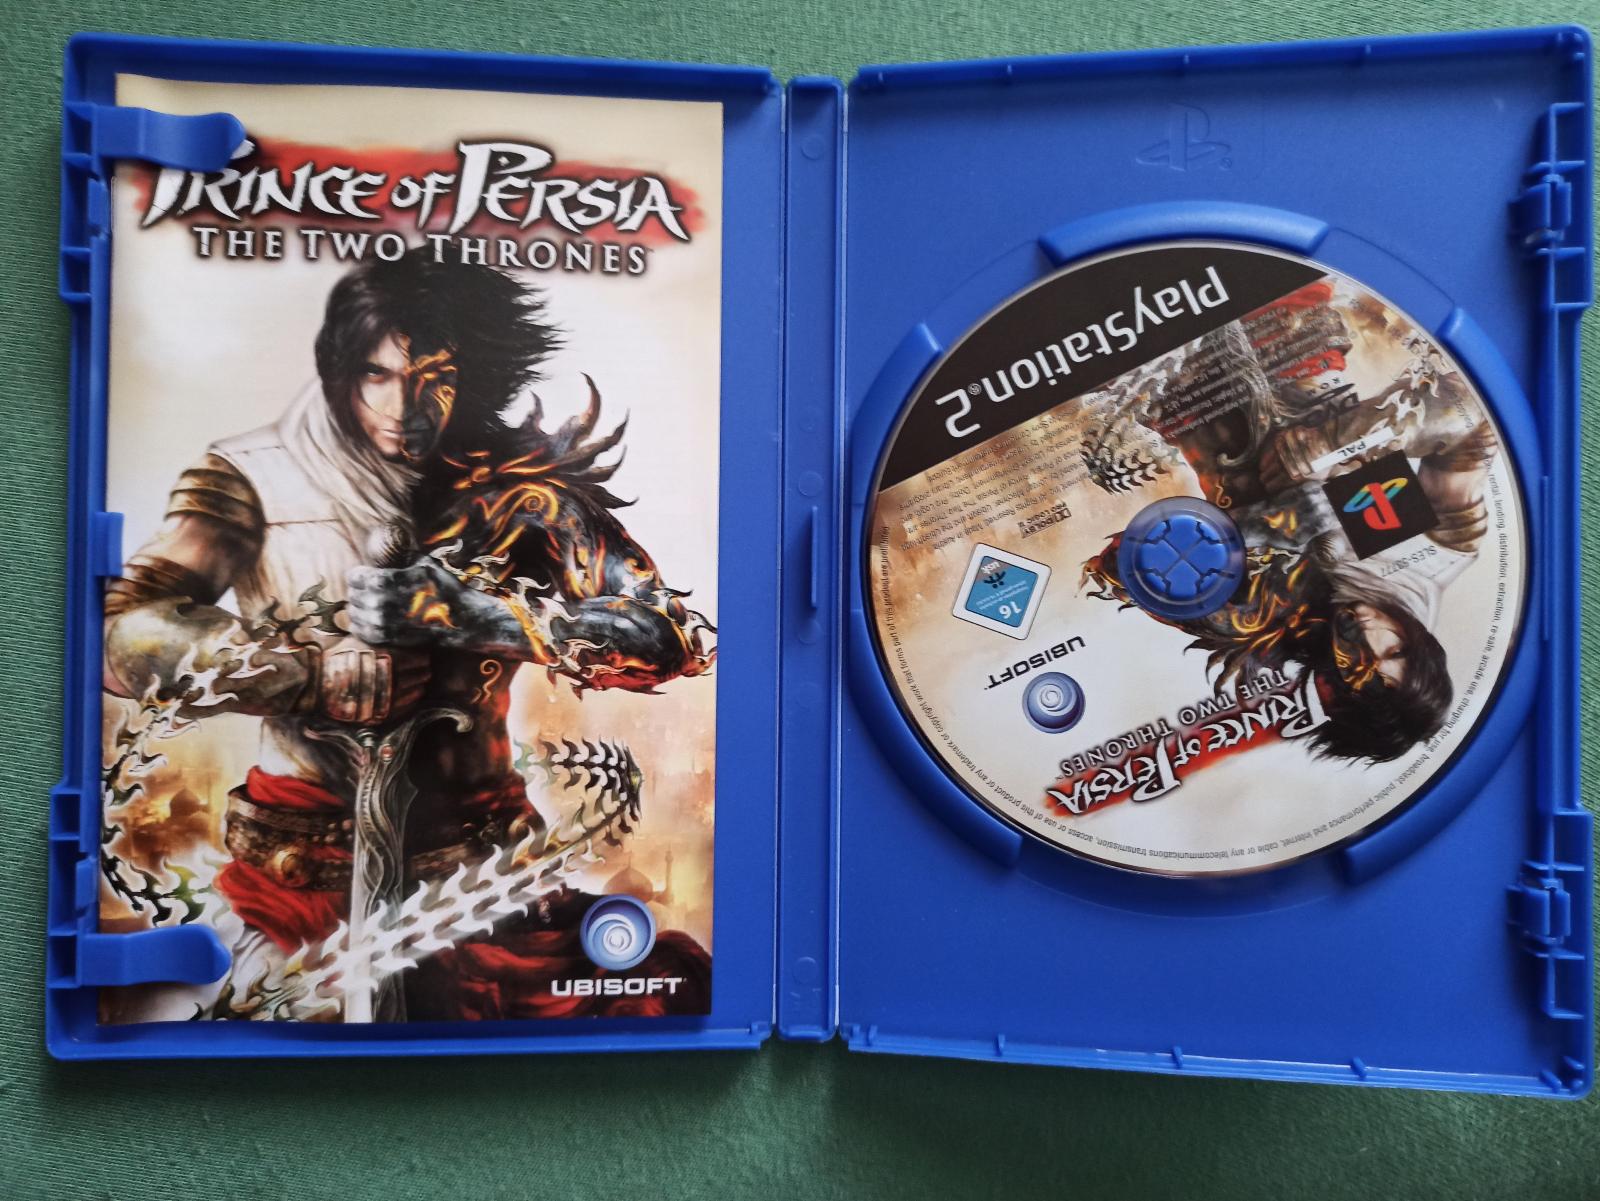 PS2 Prince of Persia Trilogy Limited Edition - Hry